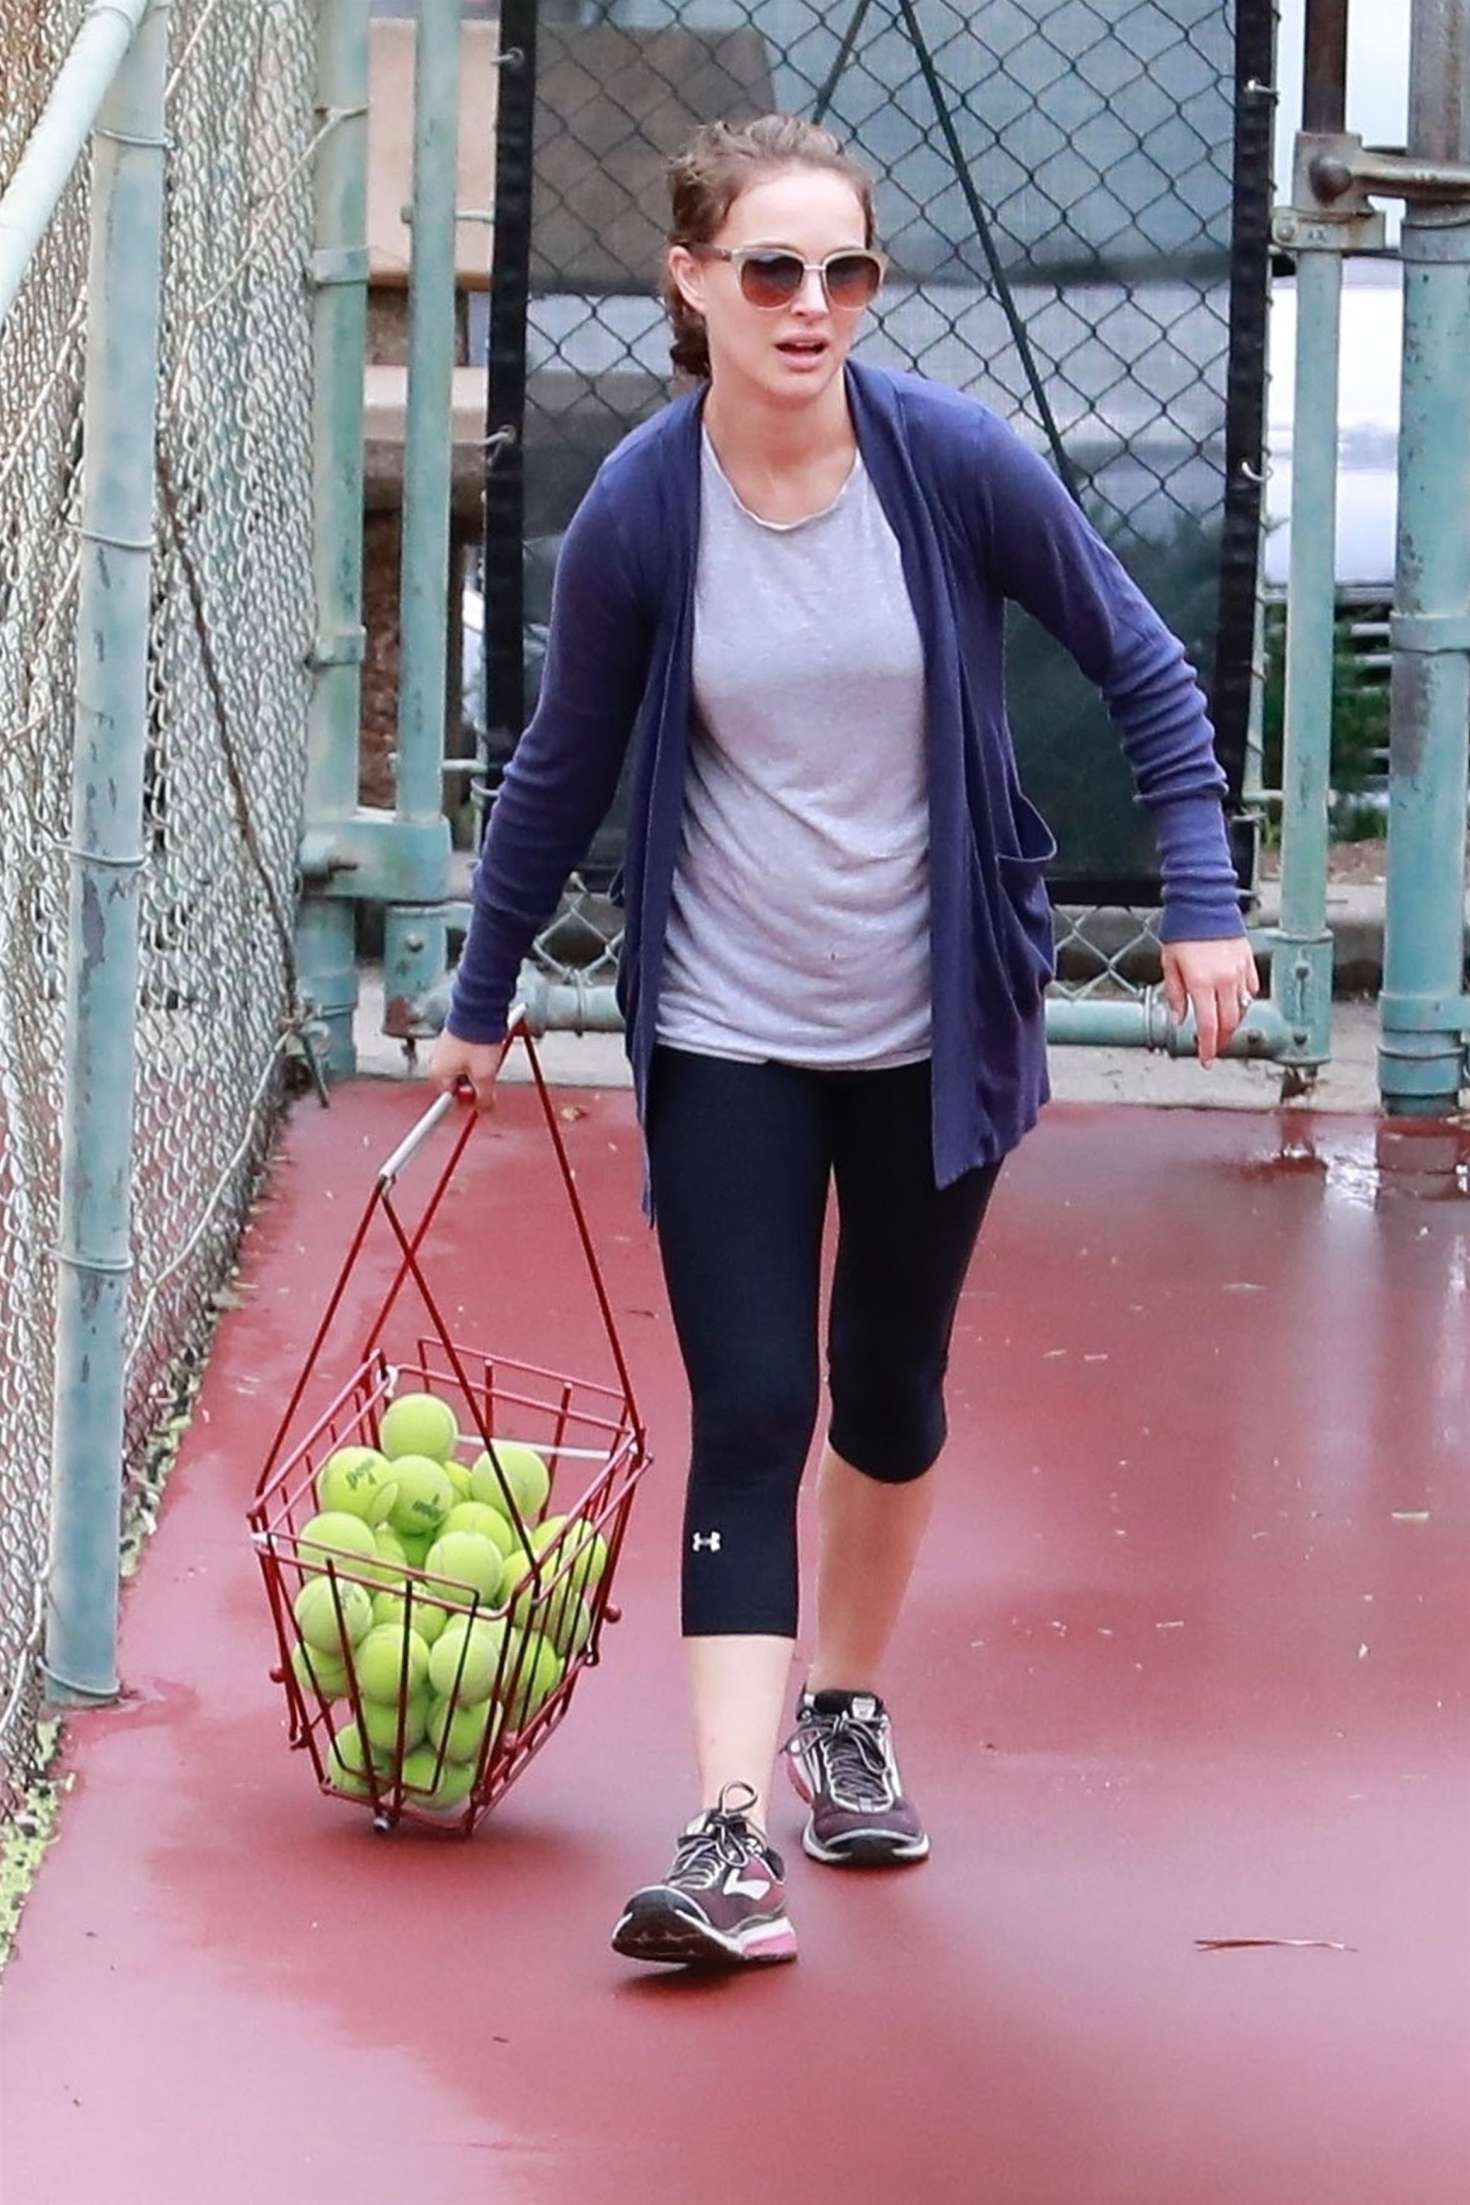 Natalie Portman gets in a morning tennis class in Los Angeles